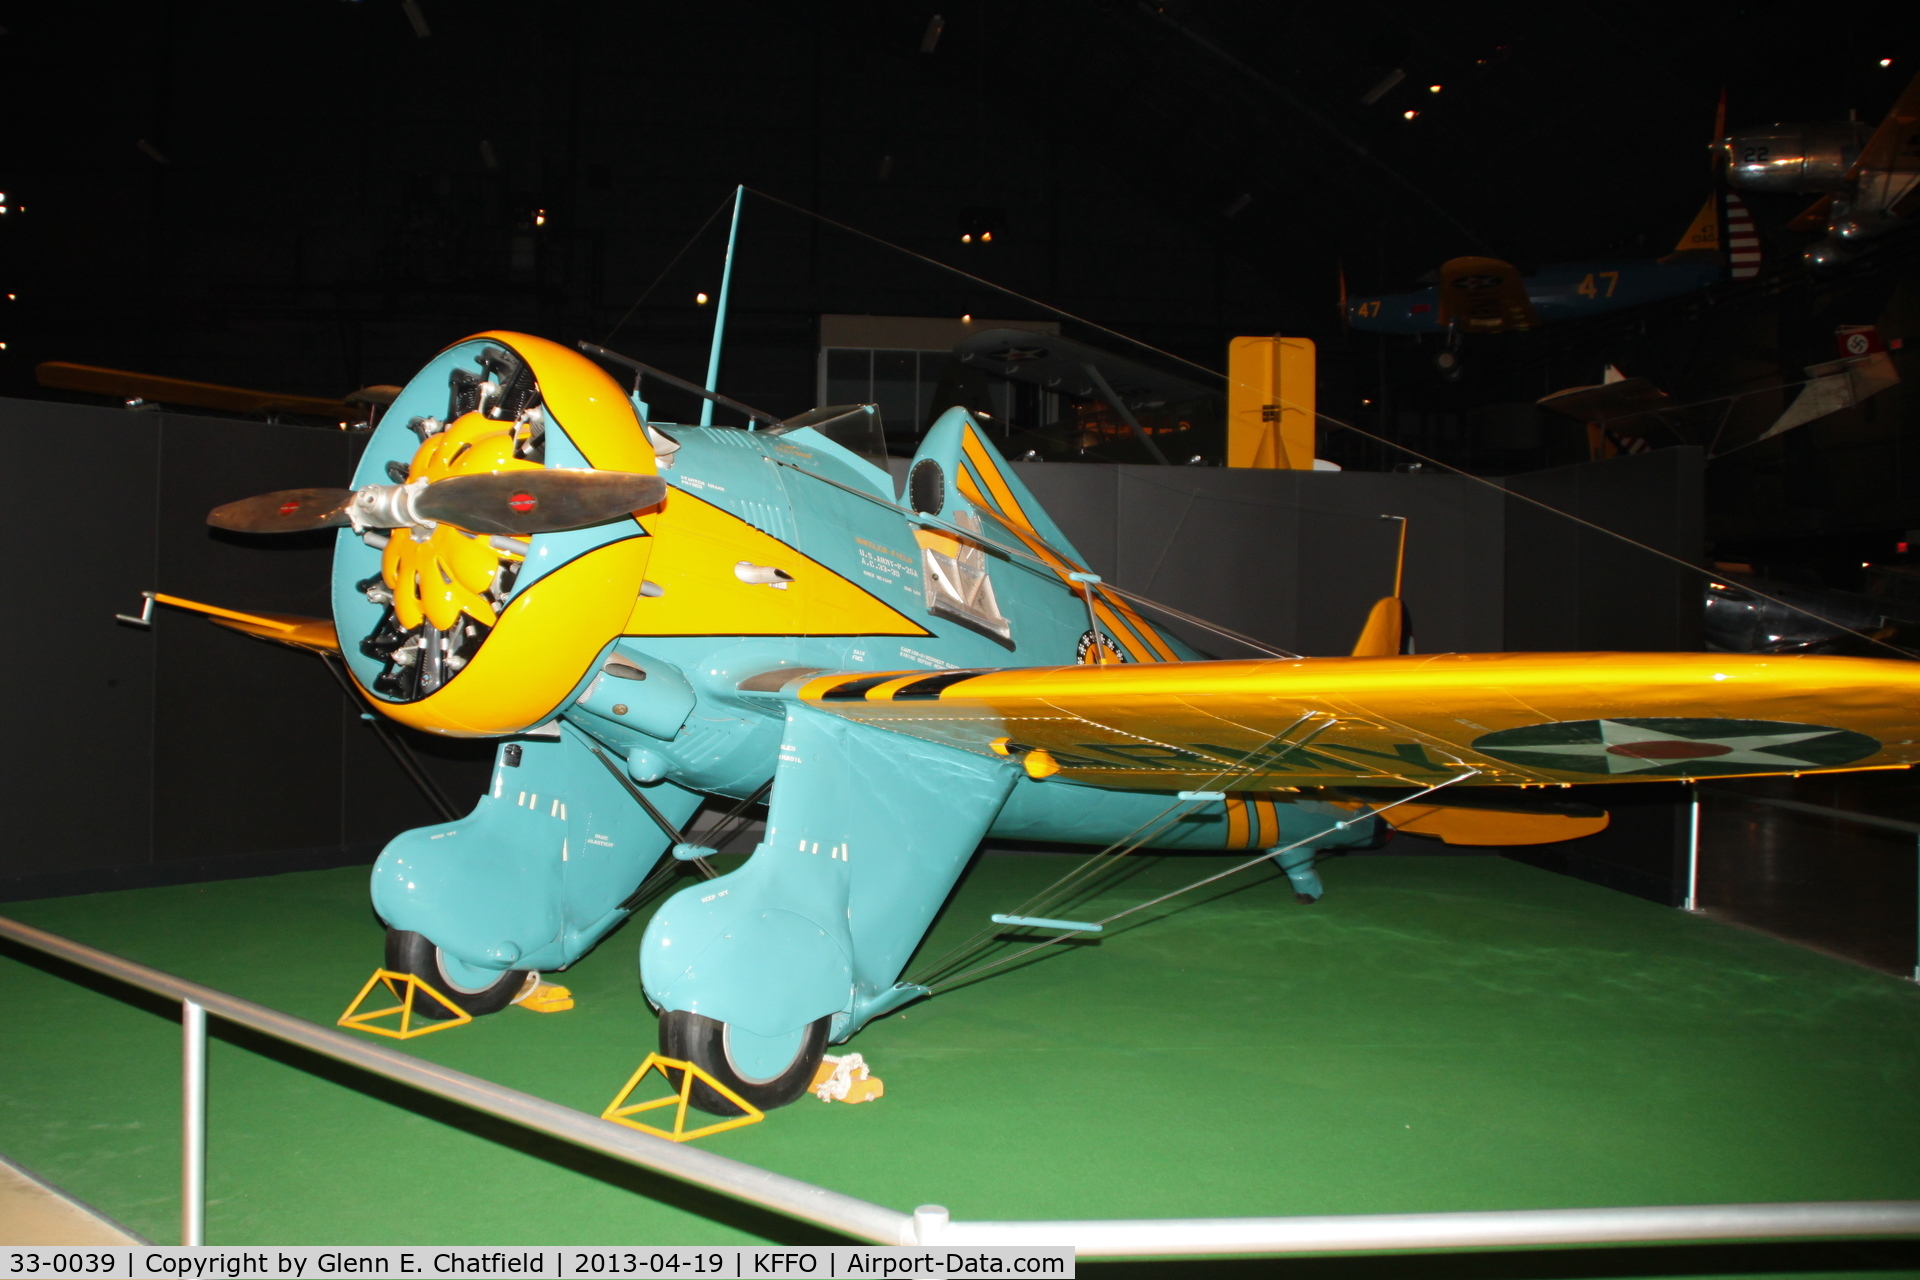 33-0039, 1933 Boeing P-26A Replica C/N 1815, In Early Years gallery